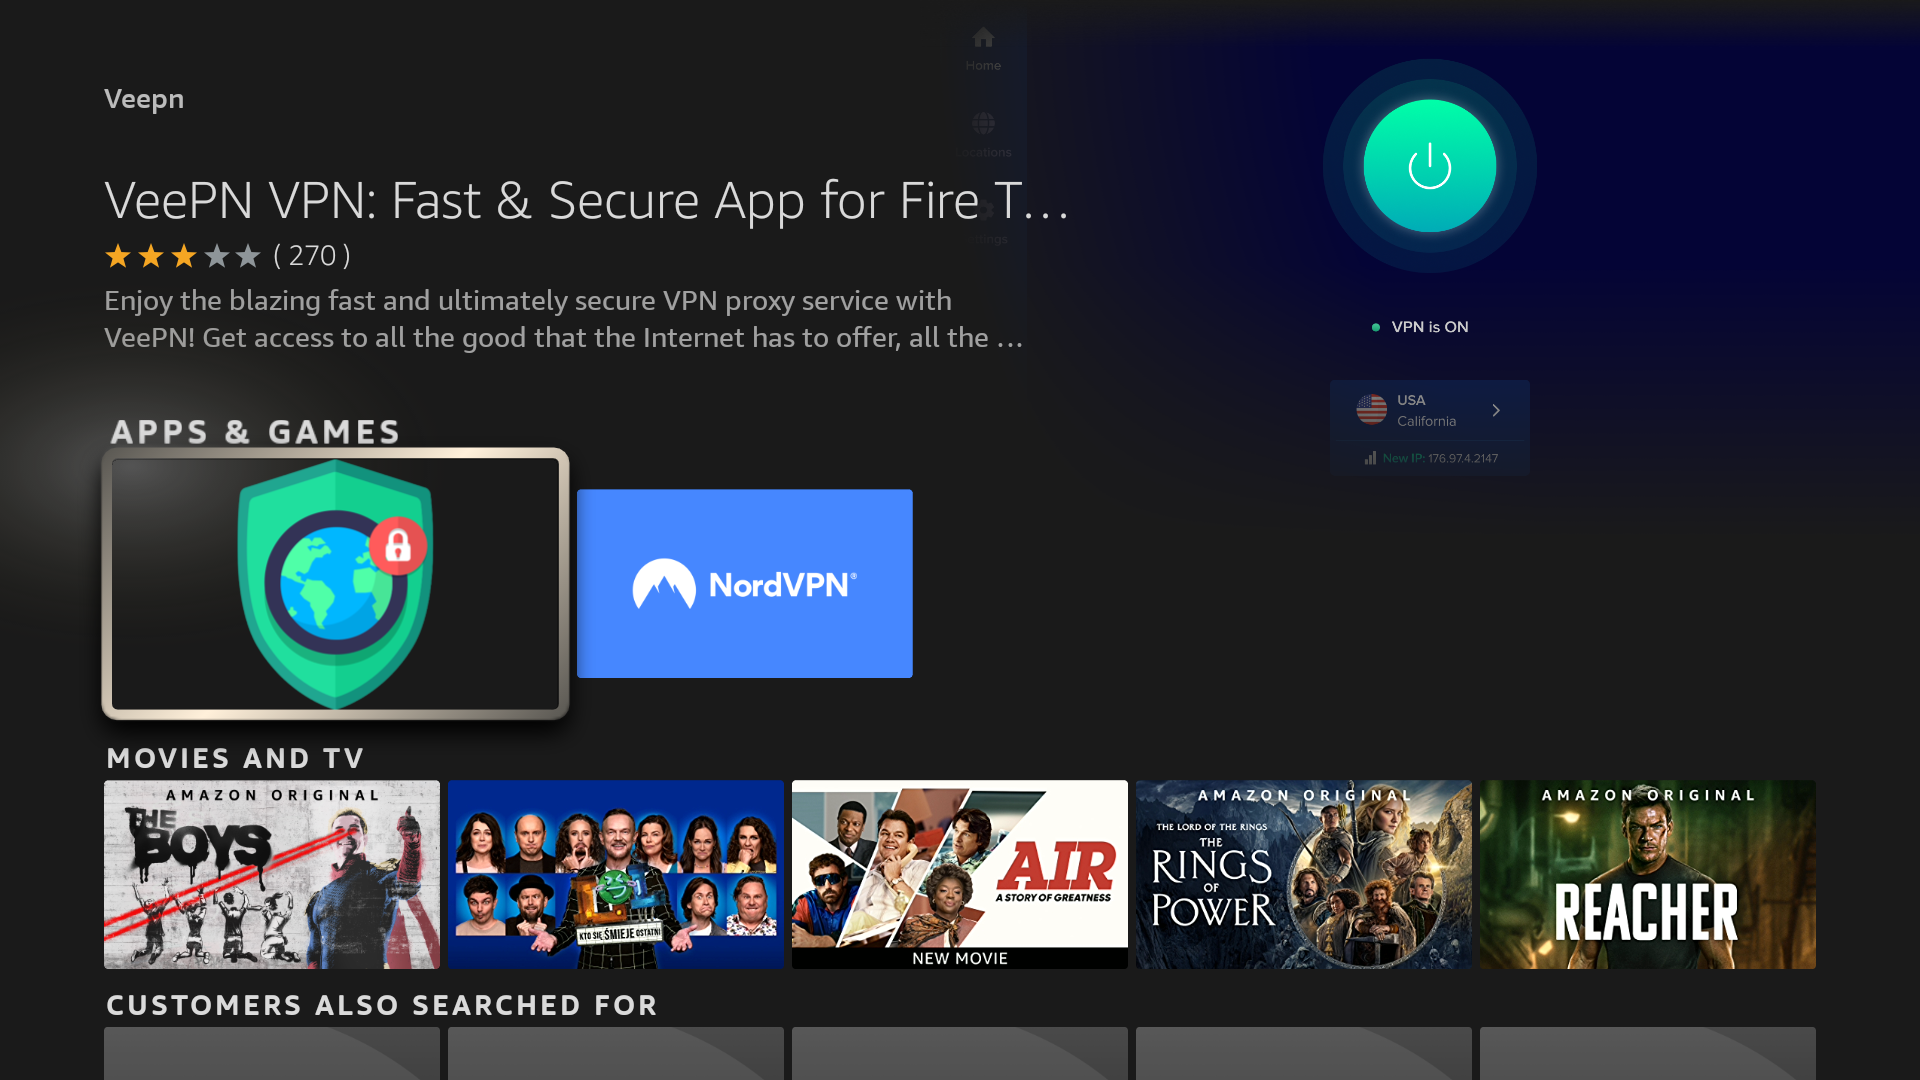 How to install and use VPN for Firestick? Third step - Type VeePN and choose it from Apps & Games section 